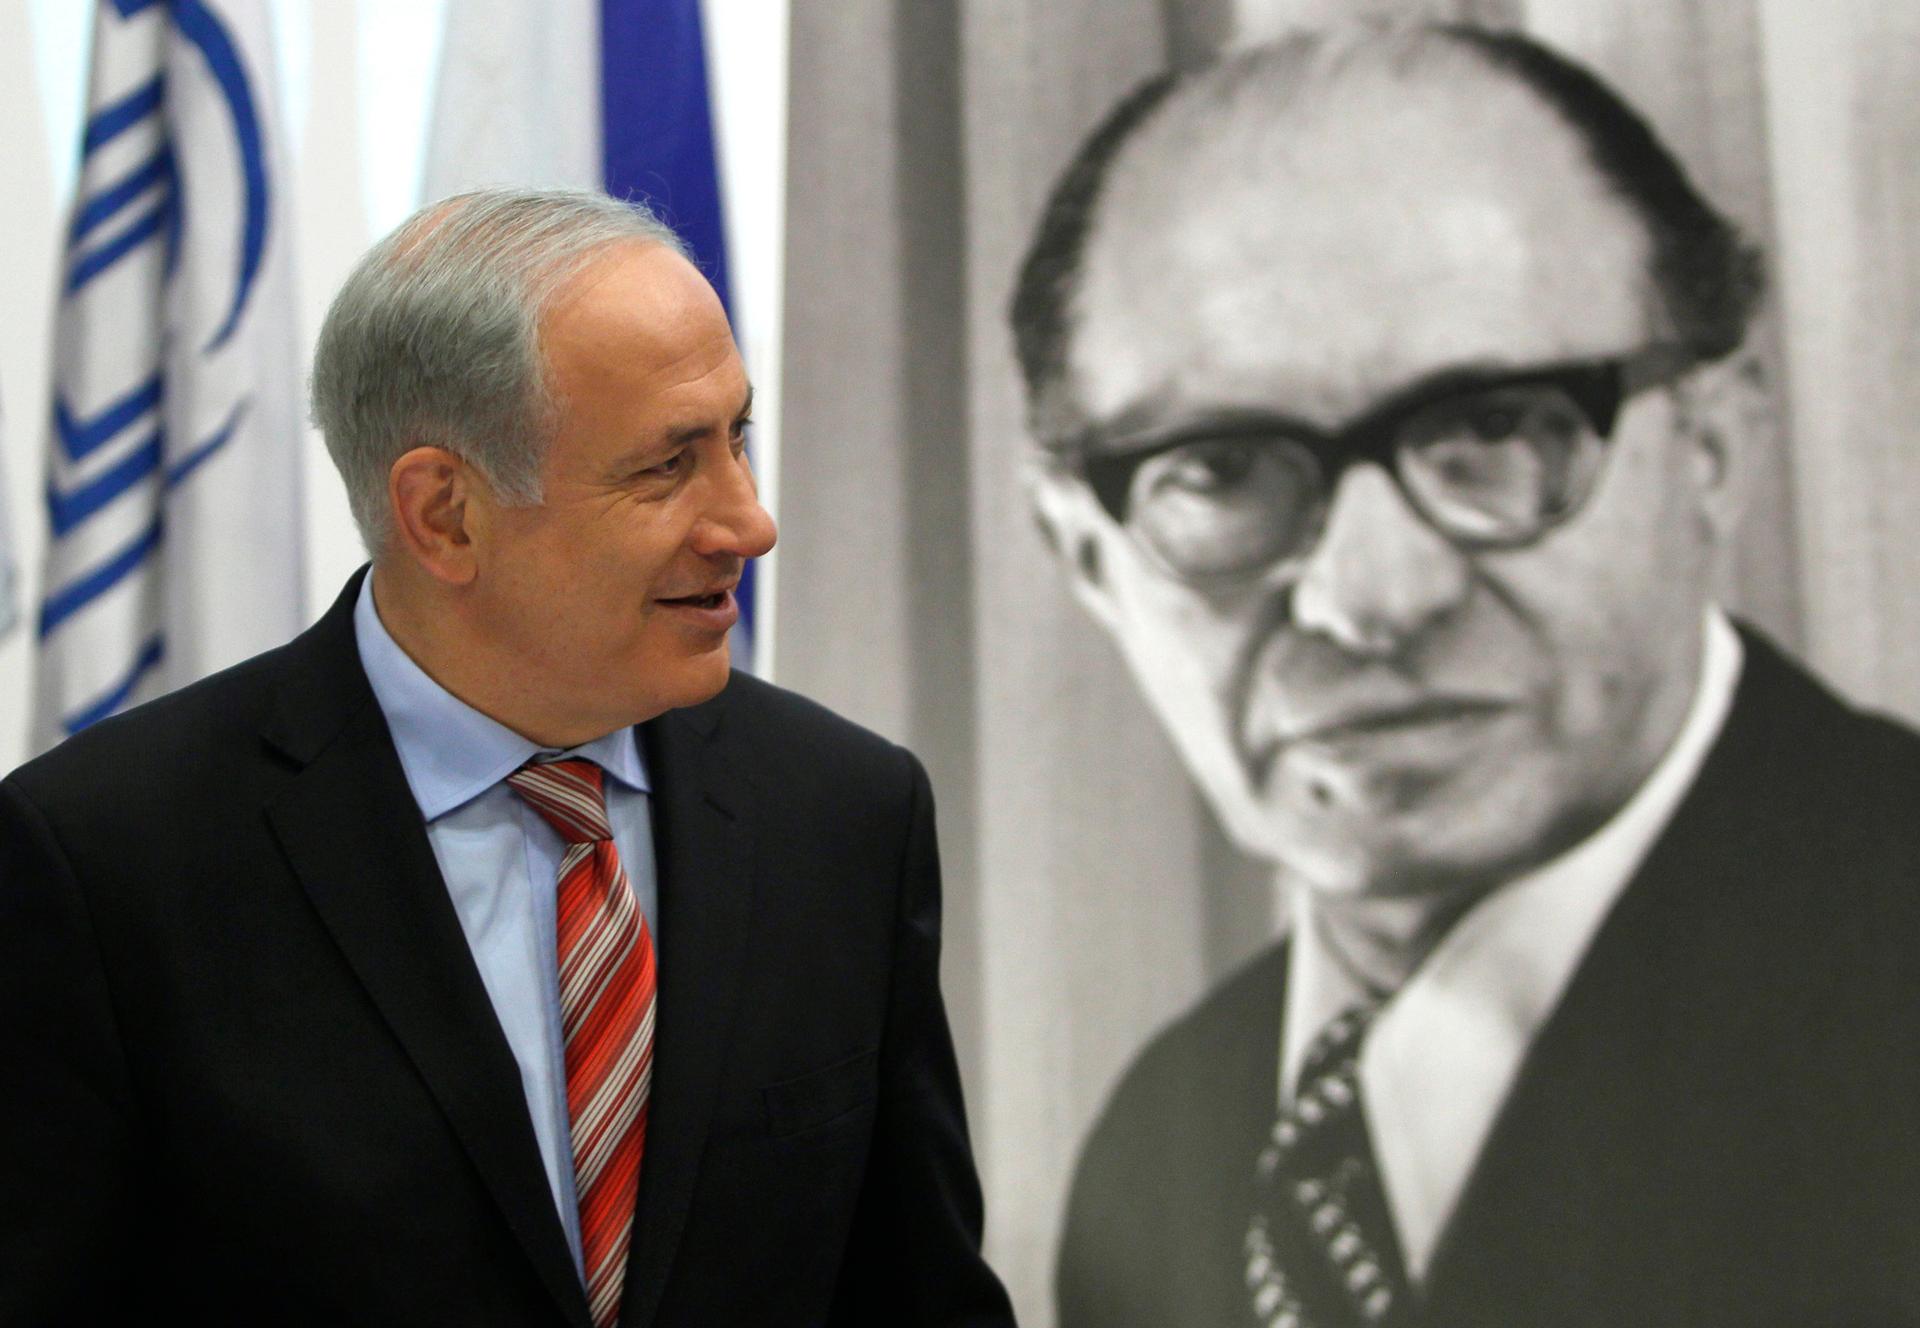 Israel's Prime Minister Benjamin Netanyahu walks in front of a black and white poster